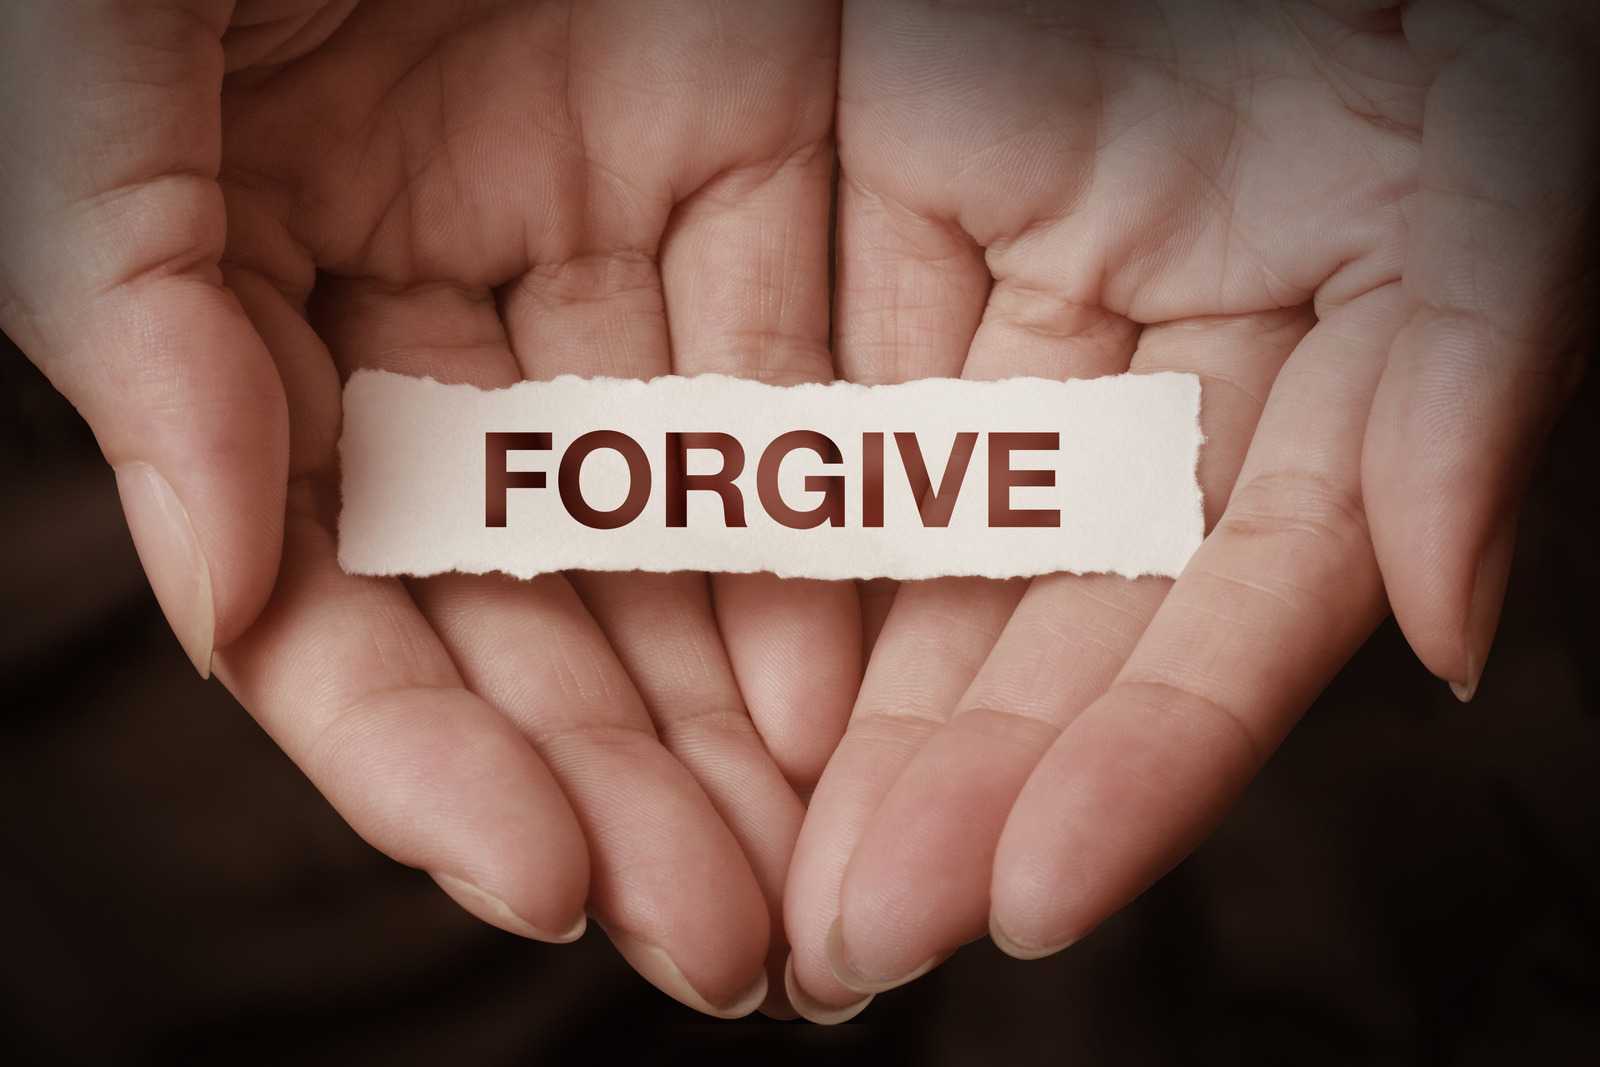 How to Effectively Forgive Others